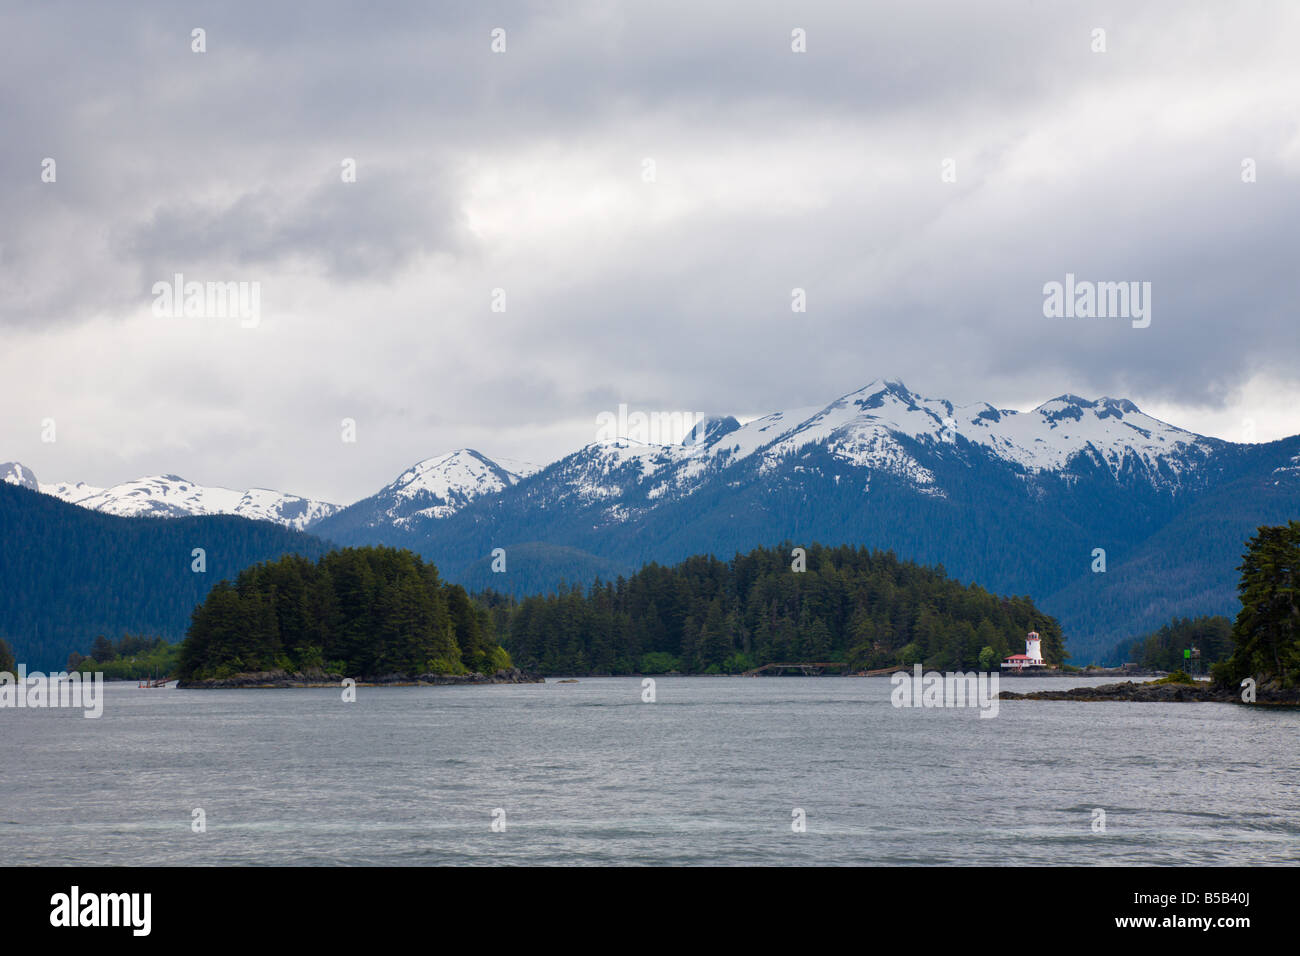 Lighthouse in front of snow capped mountains on island in Eastern Channel of the Inside Passage at Sitka, Alaska Stock Photo